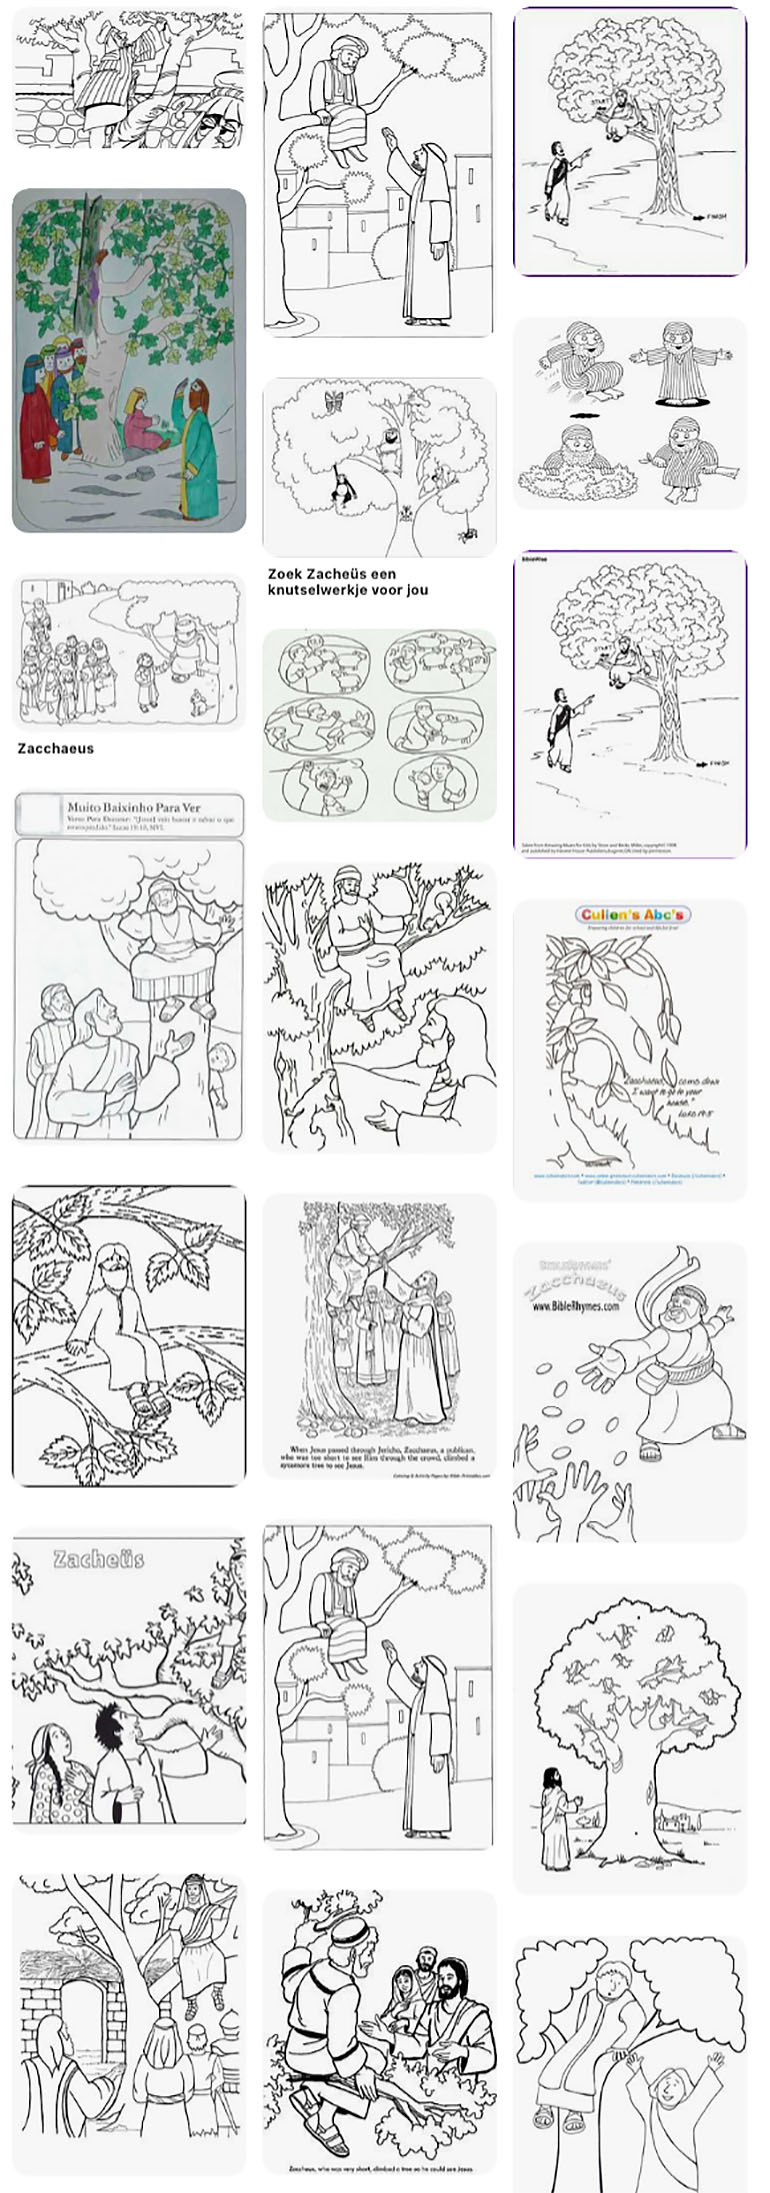 The Workers In The Vineyard Coloring Page Sundayschoolist